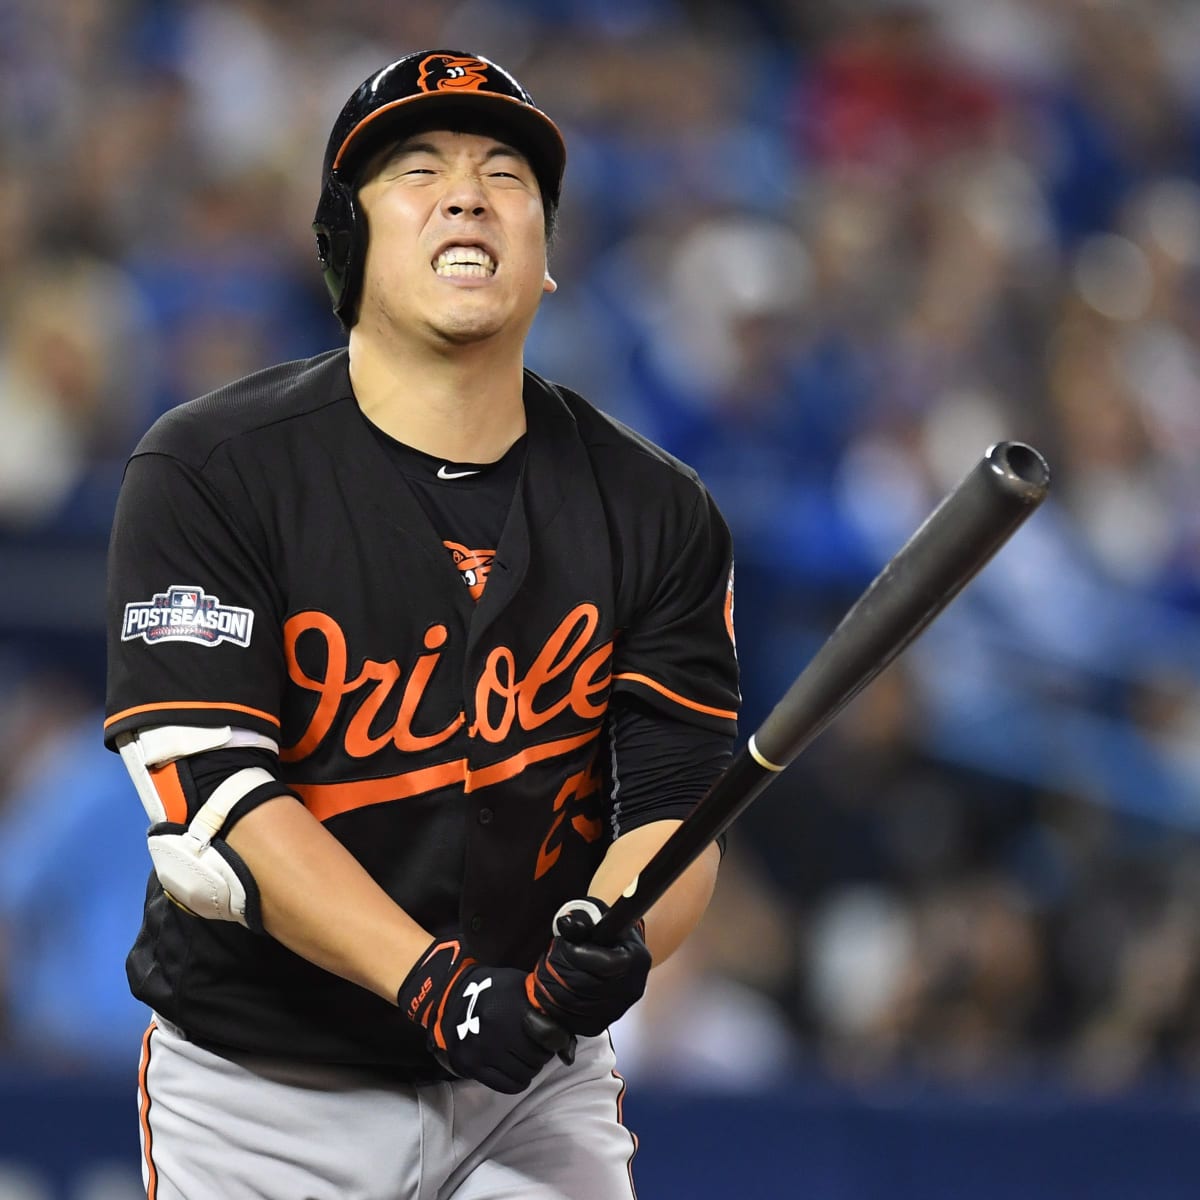 Fan throws can at Orioles' Hyun Soo Kim during wild card game